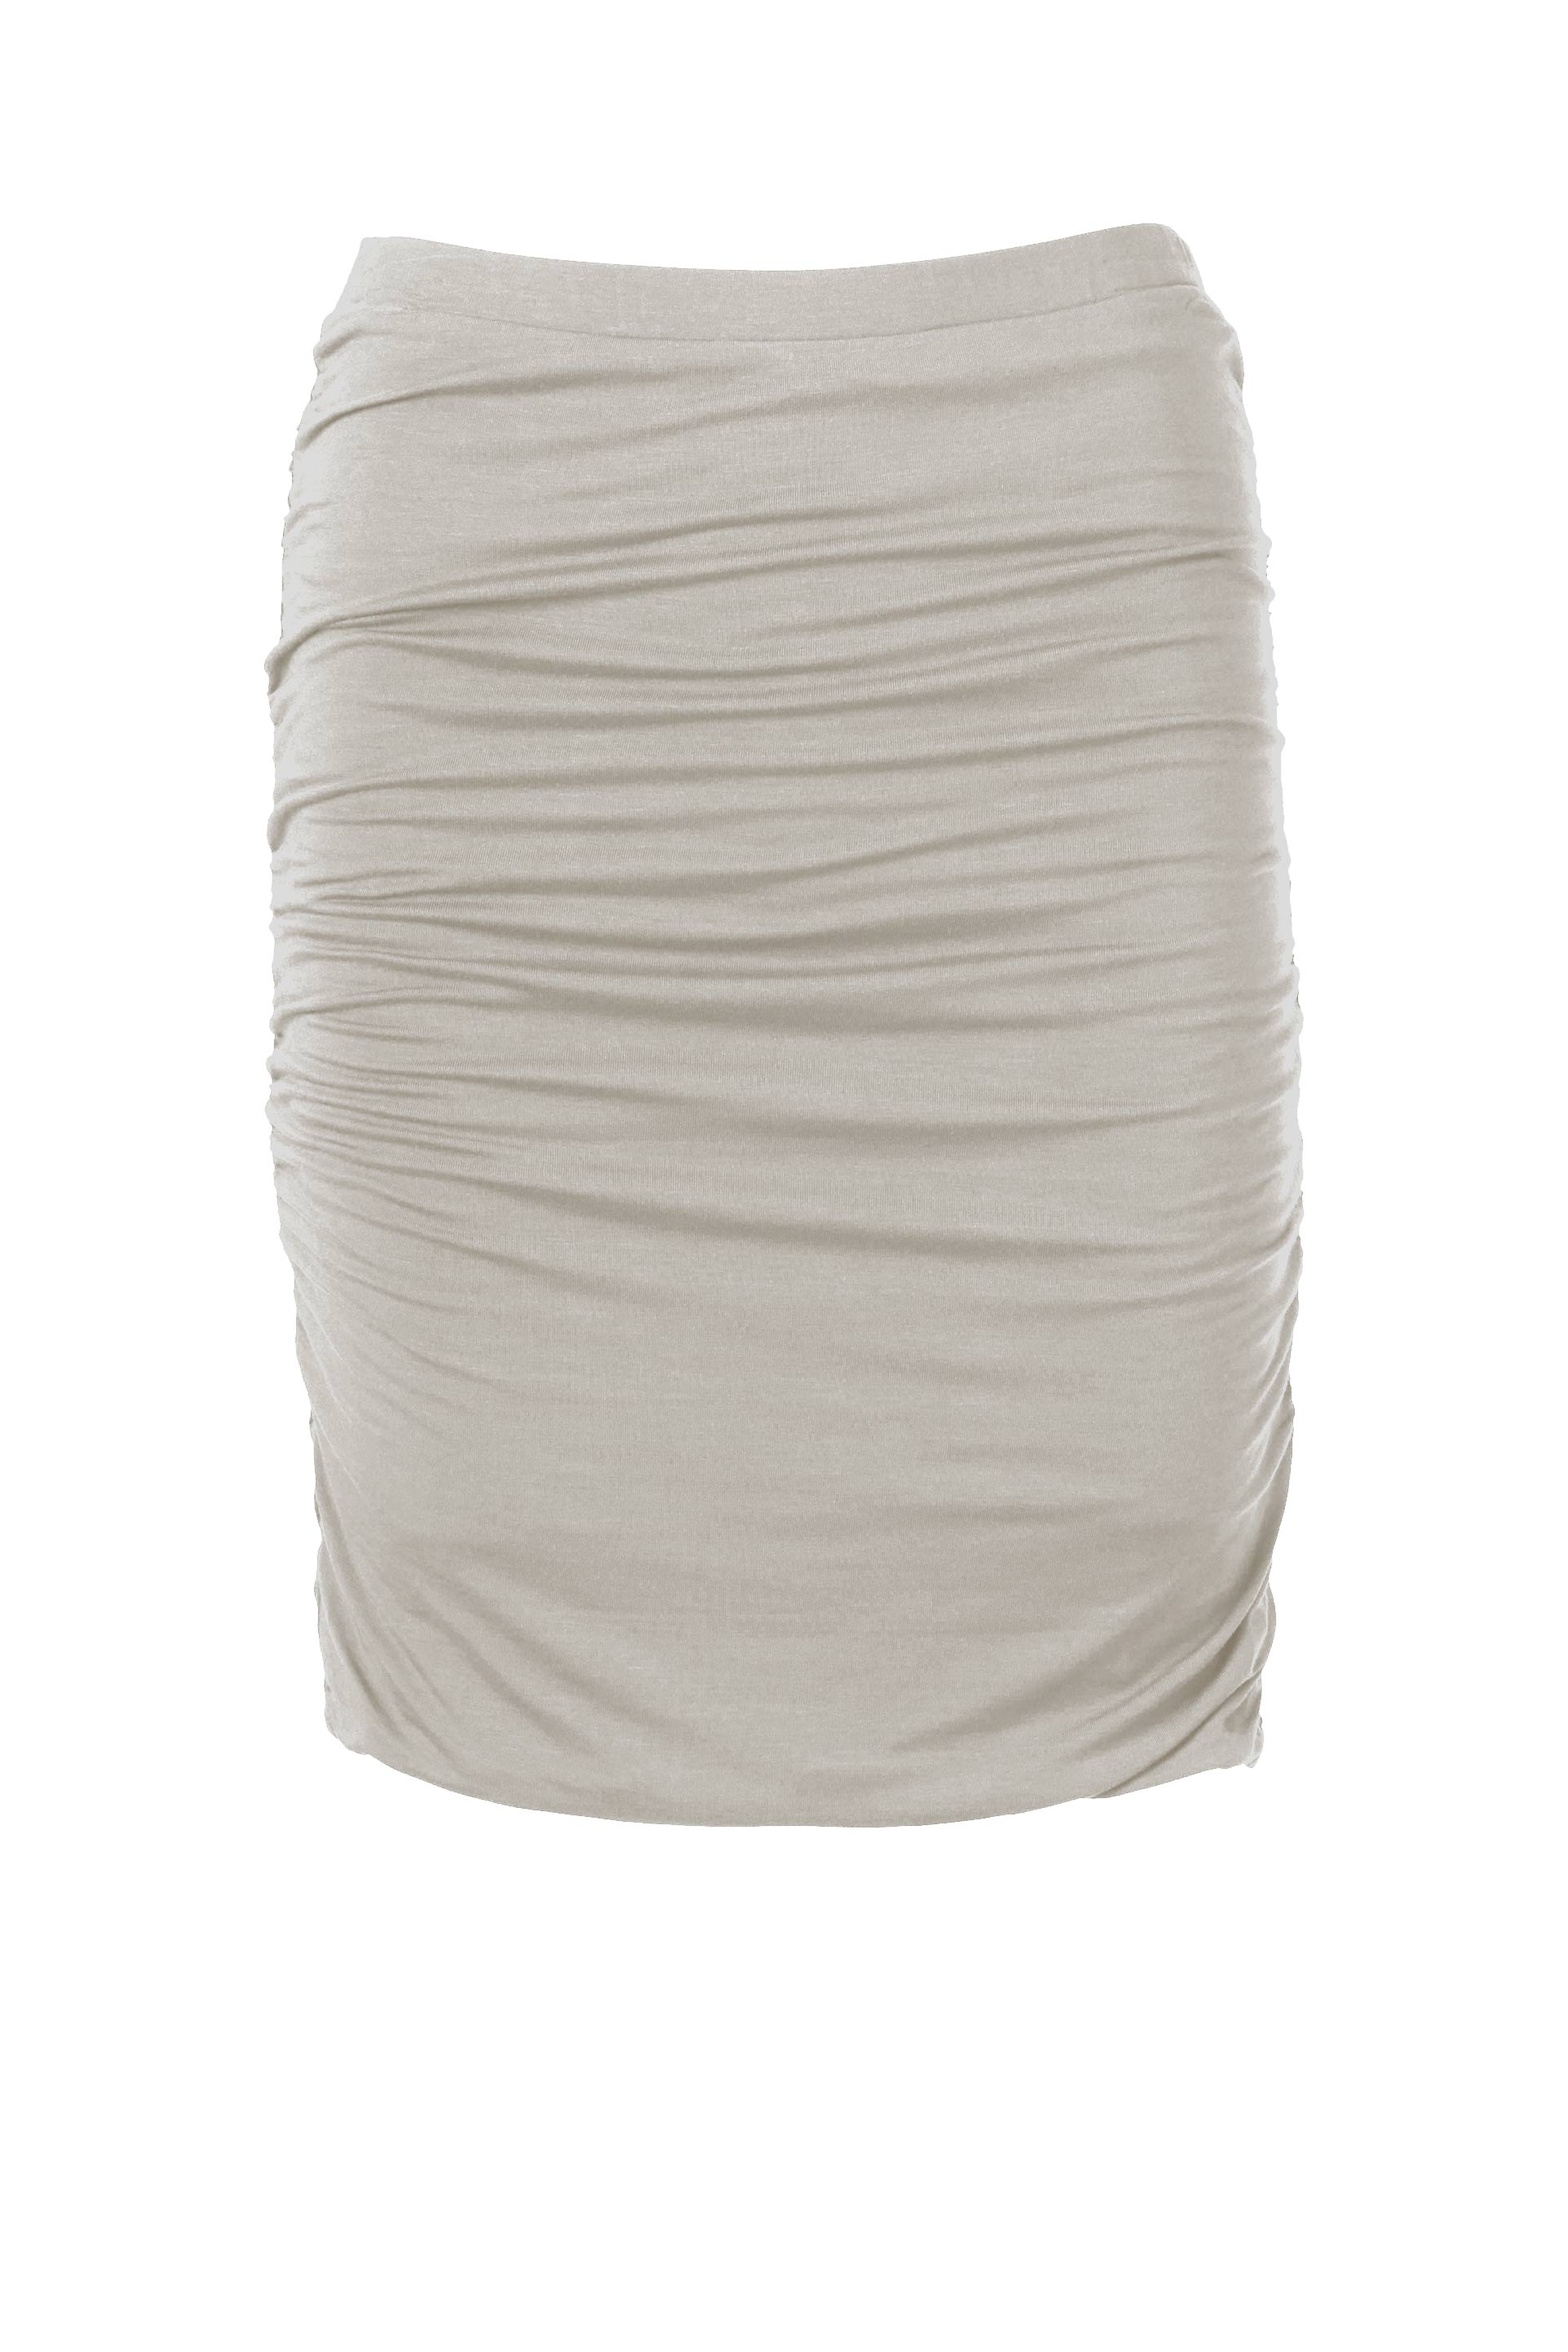 61205_ruched_skirt_pebble_grey_aw20.jpg